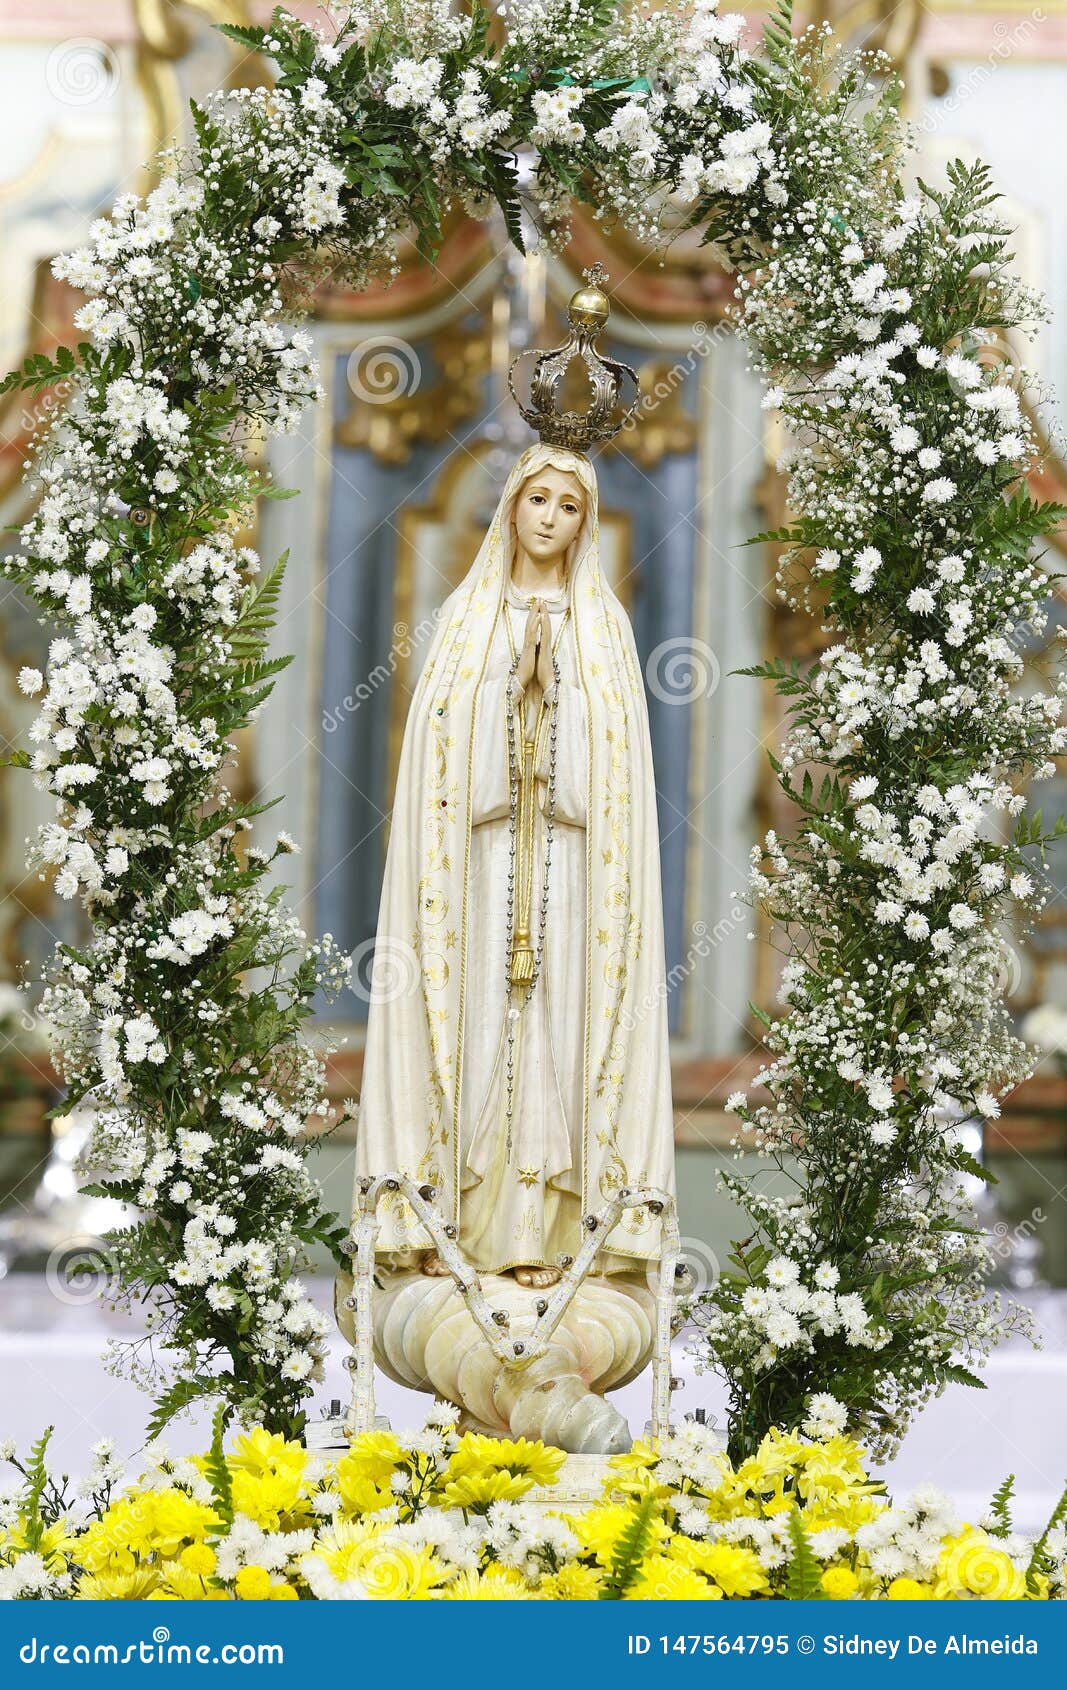 Statue of the Image of Our Lady of Fatima Stock Image - Image of ...